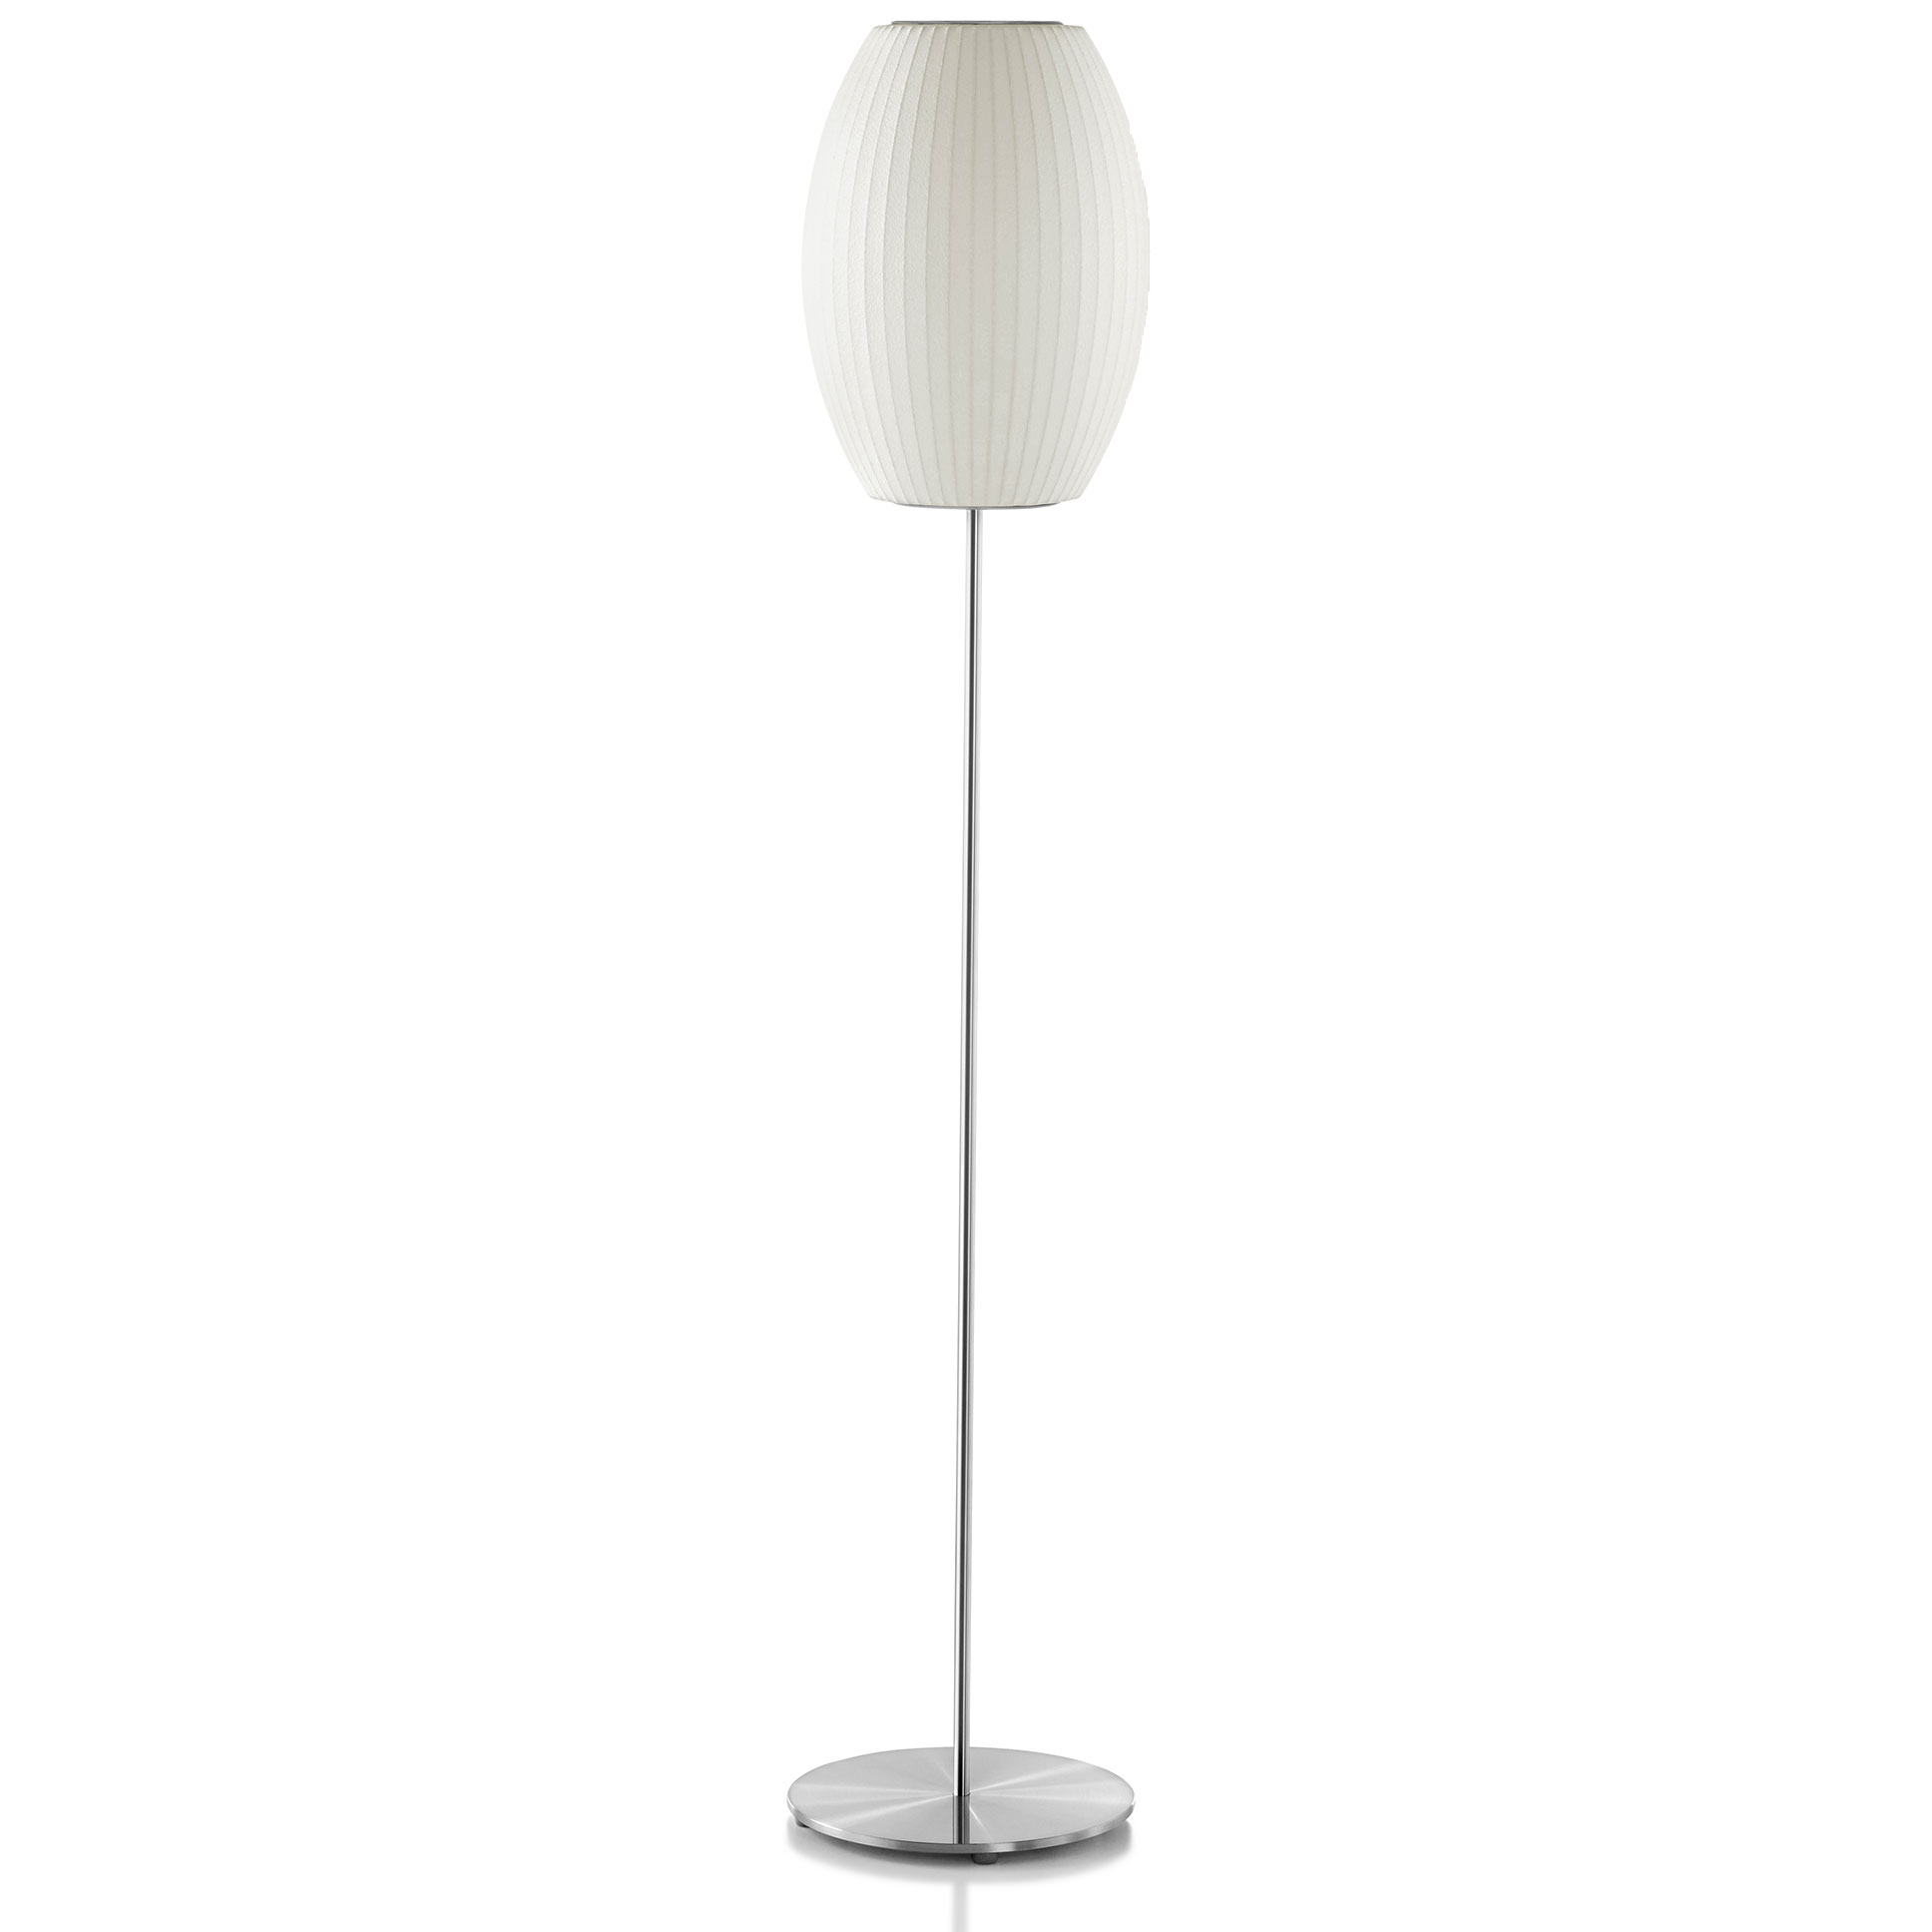 Cigar Lotus Floor Lamp By Nelson Bubble, George Nelson Bubble Table Lamp